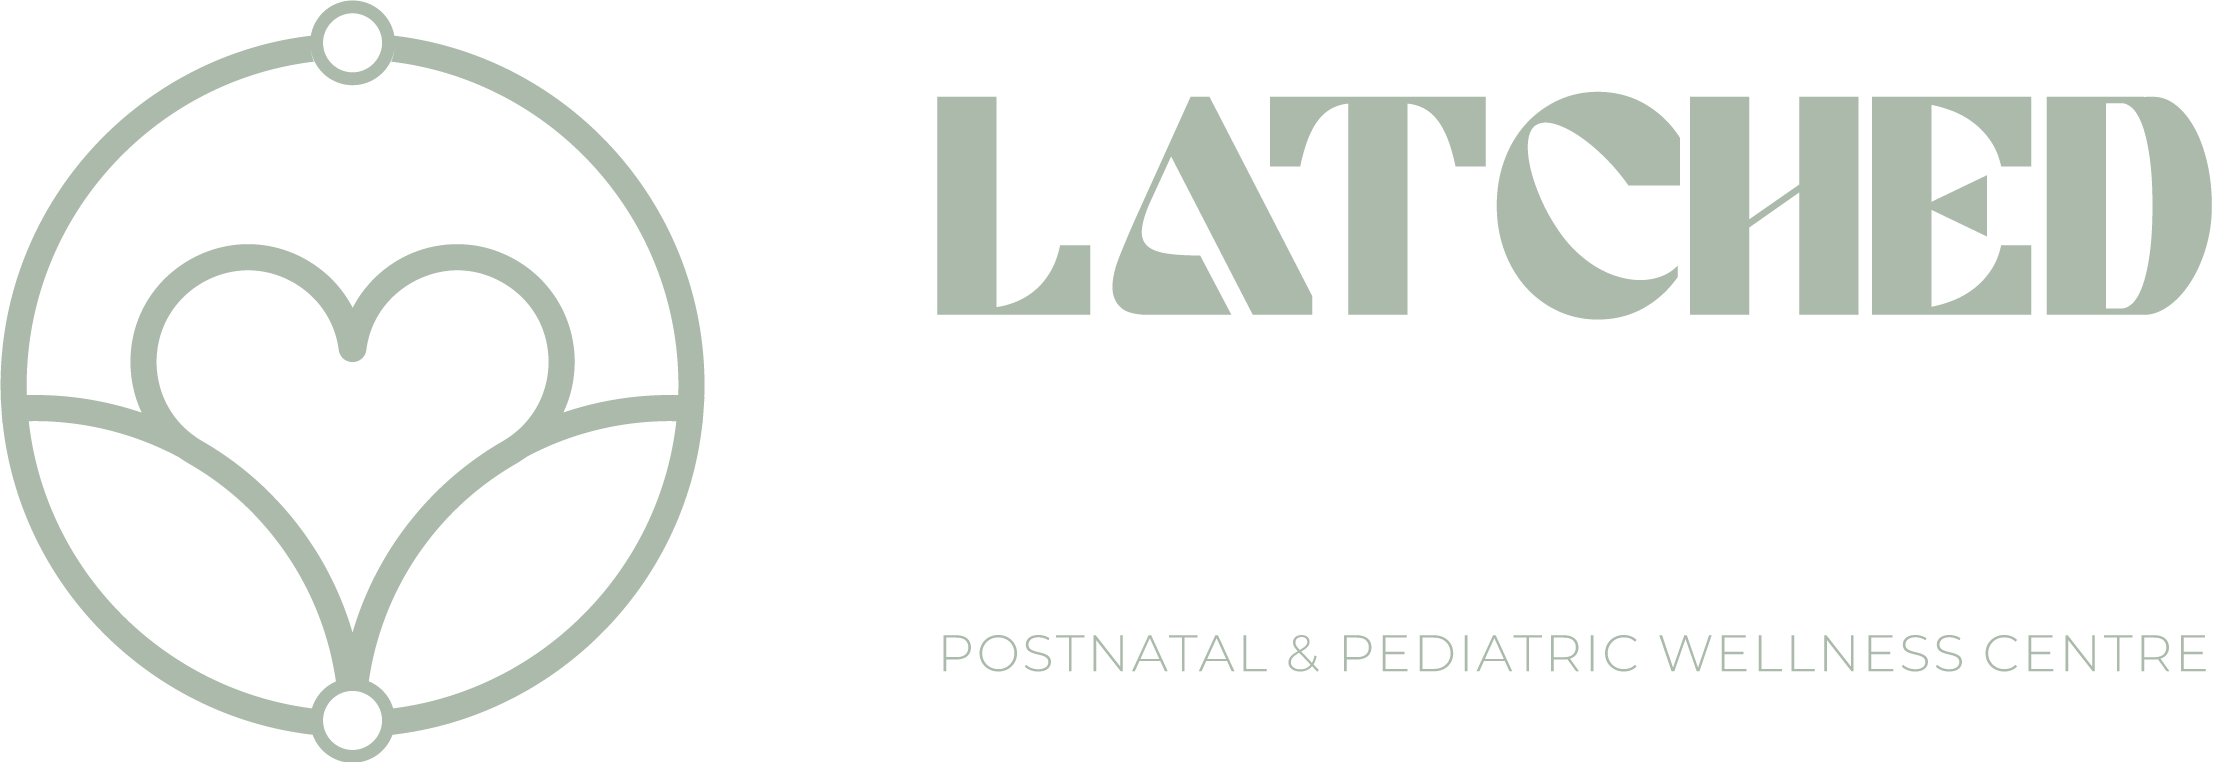 Latched & Bloom Logo of latched & bloom, featuring a stylized heart in a circle with text for a postnatal and pediatric wellness center. Pediatric and Postpartum Care